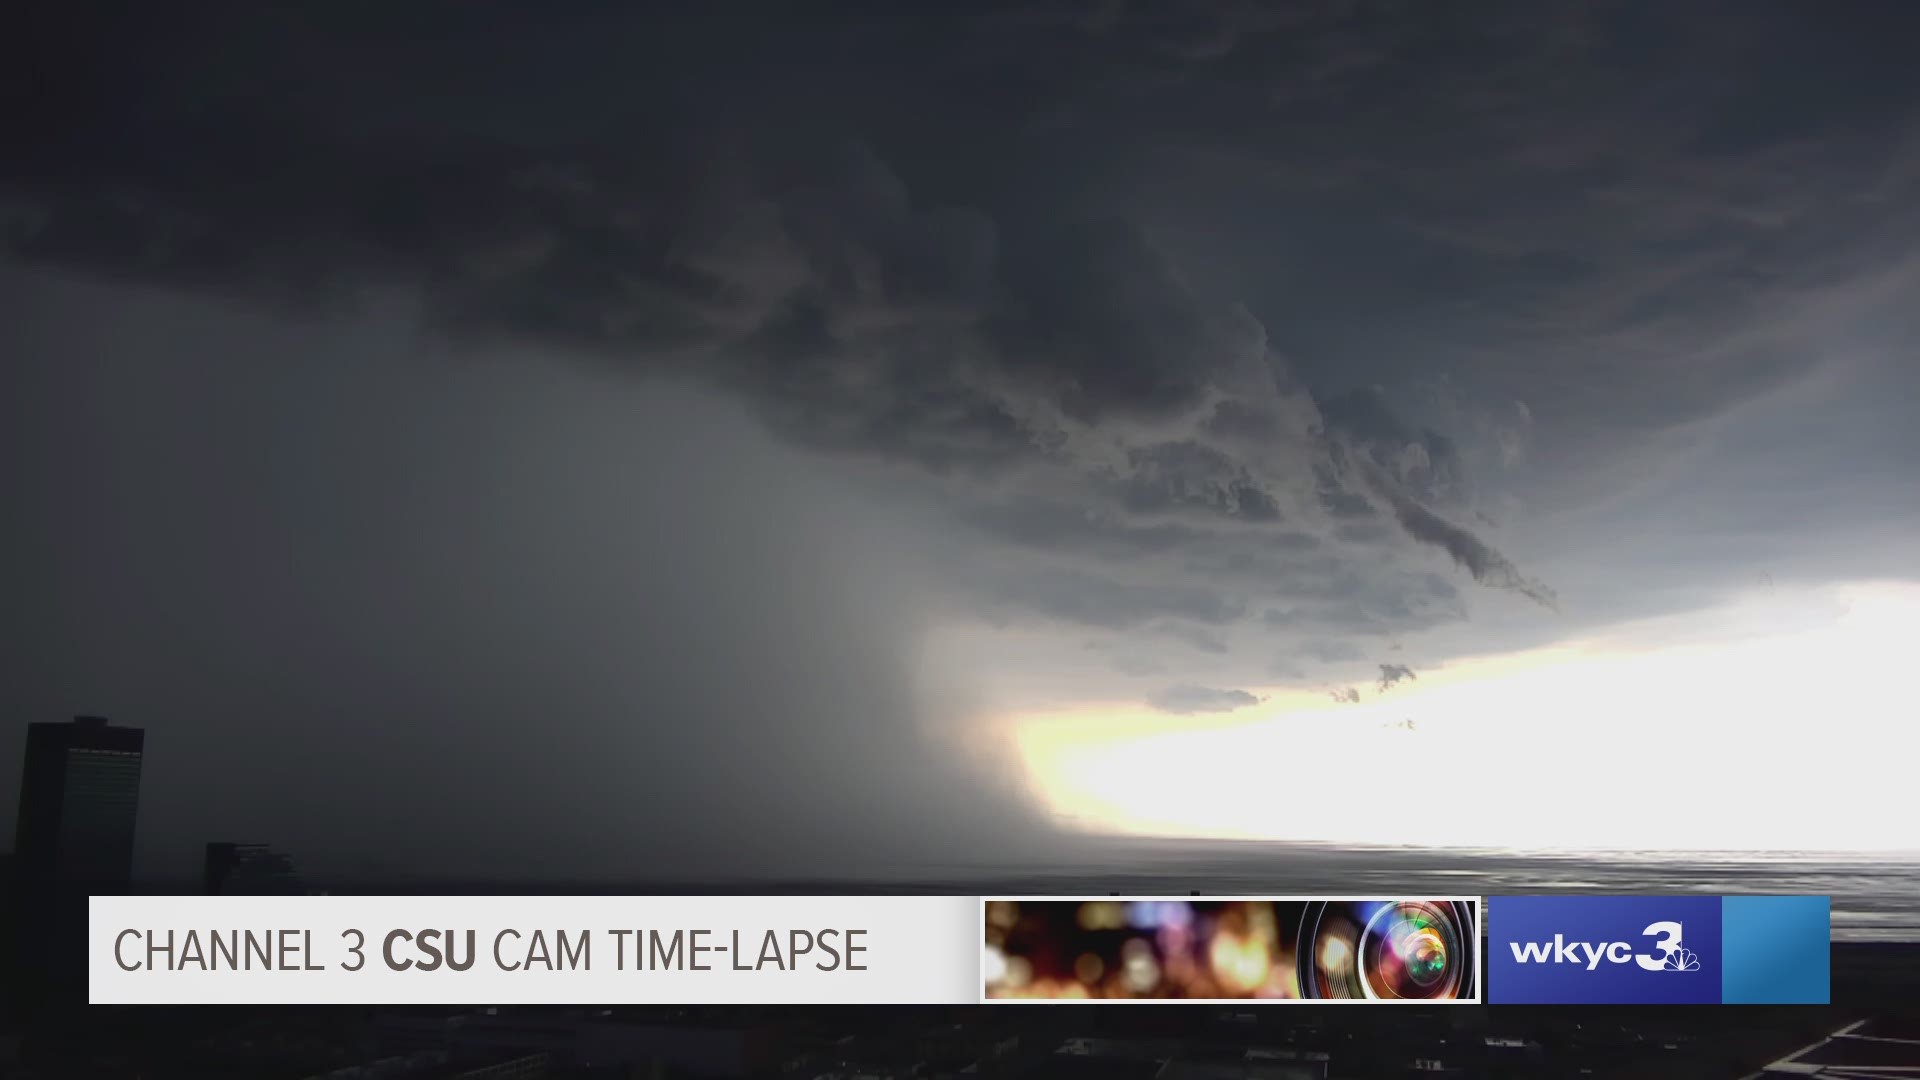 Check out our time-lapse of the storm that moved through downtown Cleveland this evening. #3weather